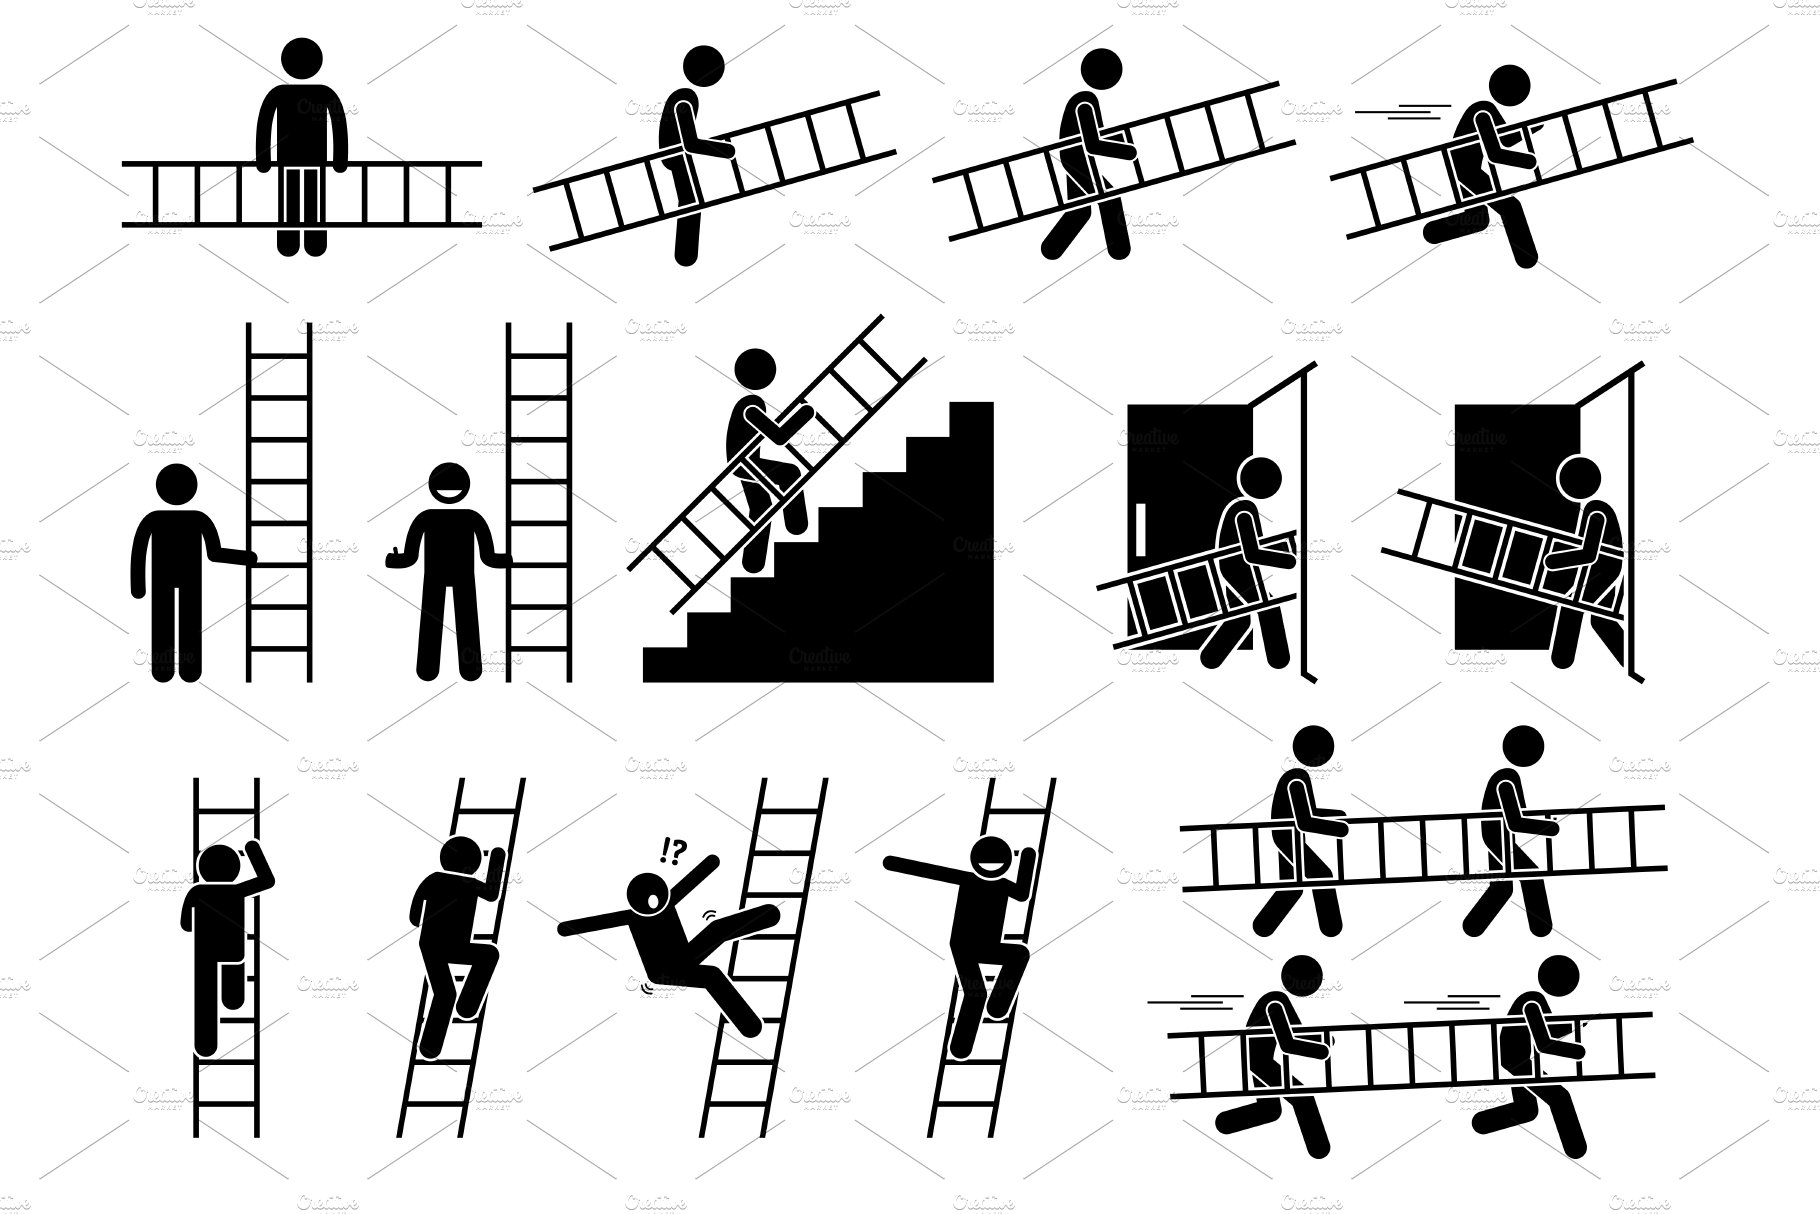 Carrying Climbing Ladder Stick Man cover image.